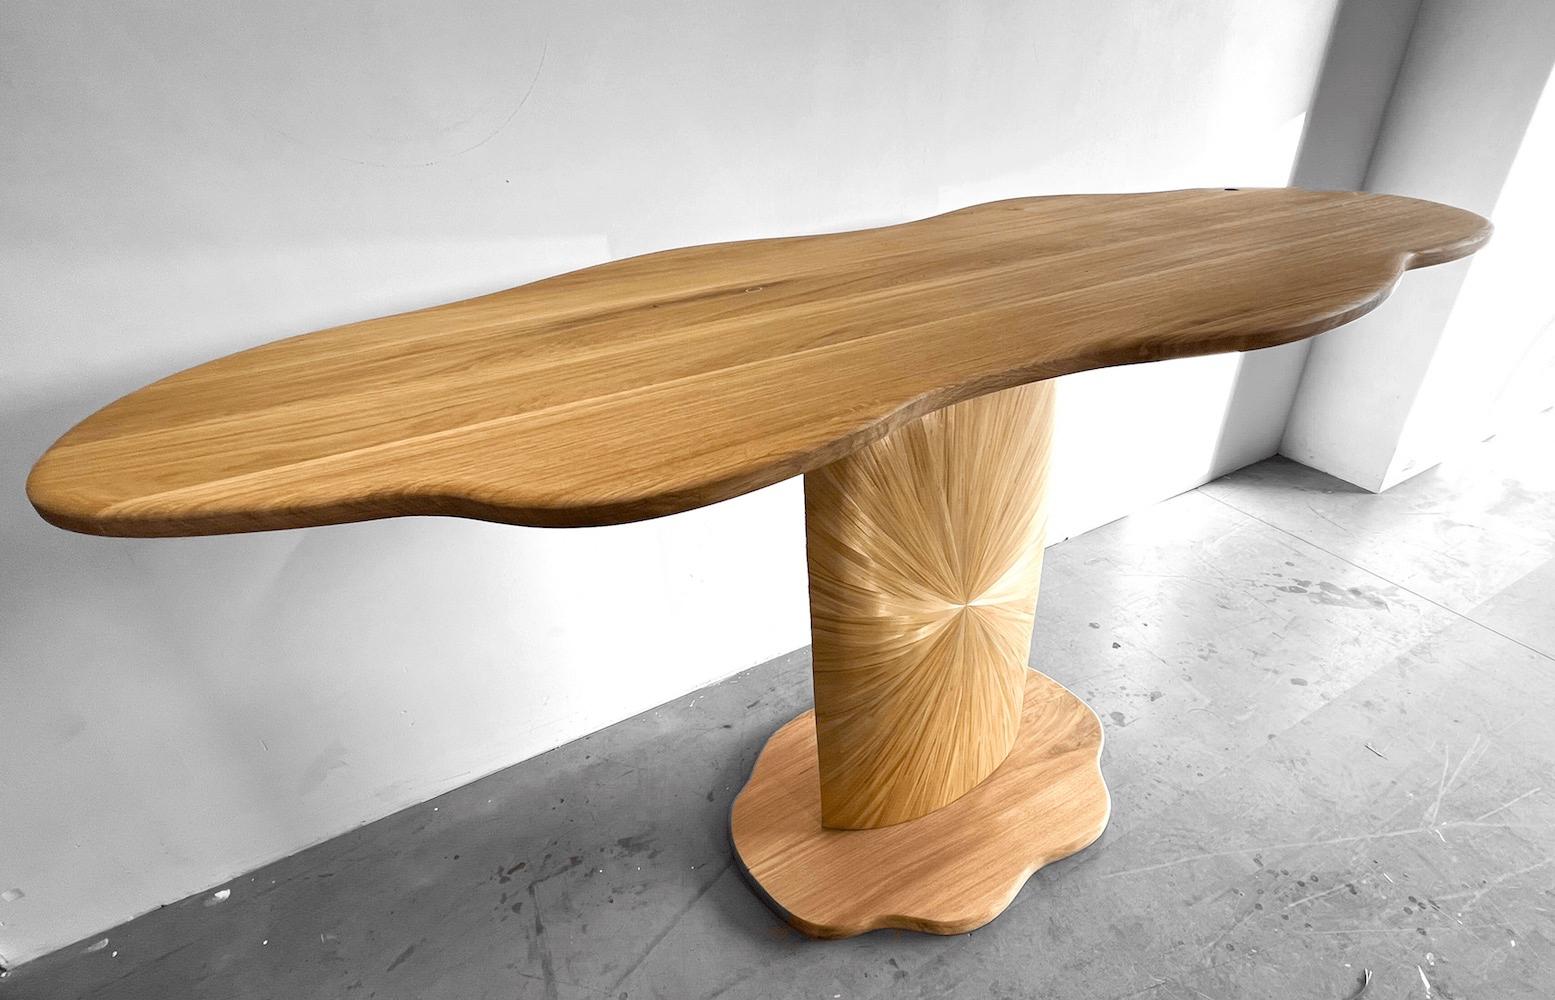 Oblivion, a cloud-shaped high table, has been crafted completely by hand and draws its inspiration from the village of Saint-Tropez. The warmth of the light oak wood and the shimmering chatoyance of the straw marquetry are reminiscent of the